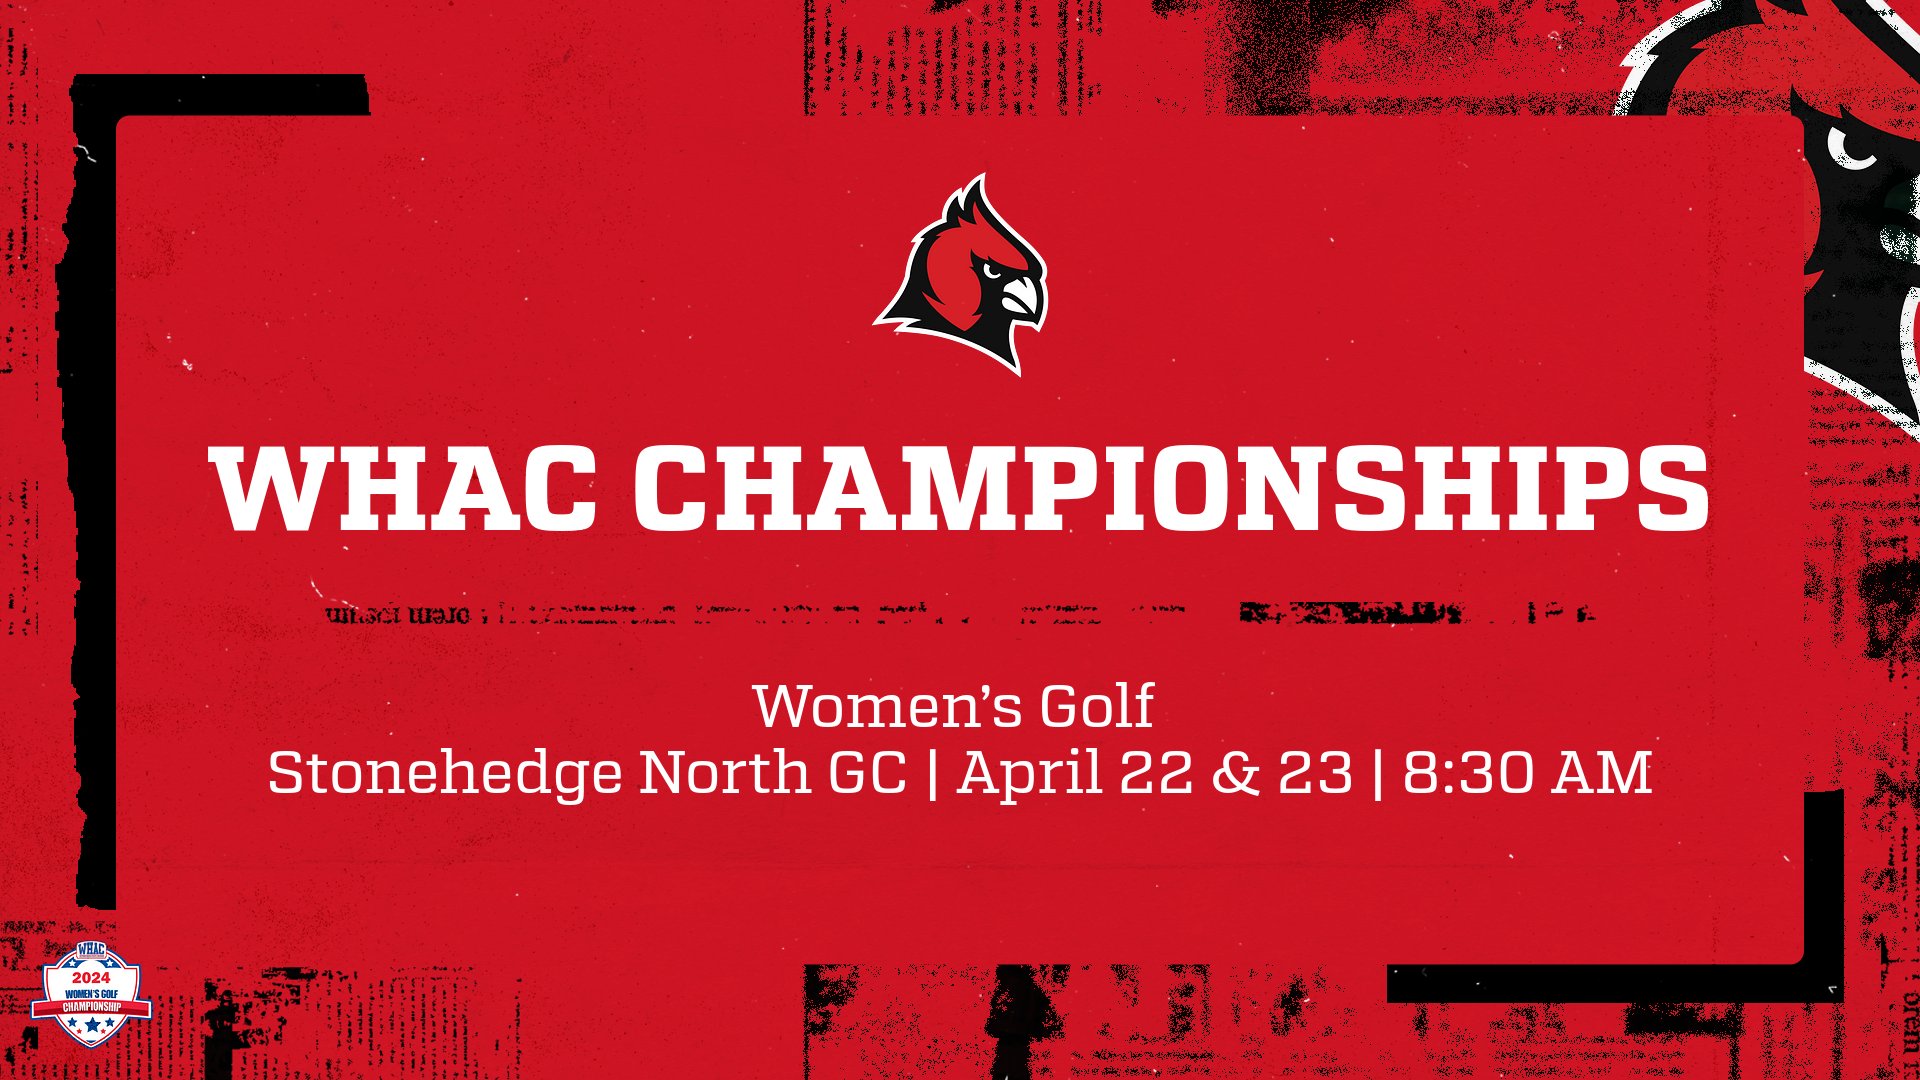 WHAC CHAMPIONSHIP PREVIEW: Women's Golf set to compete at the WHAC Championships